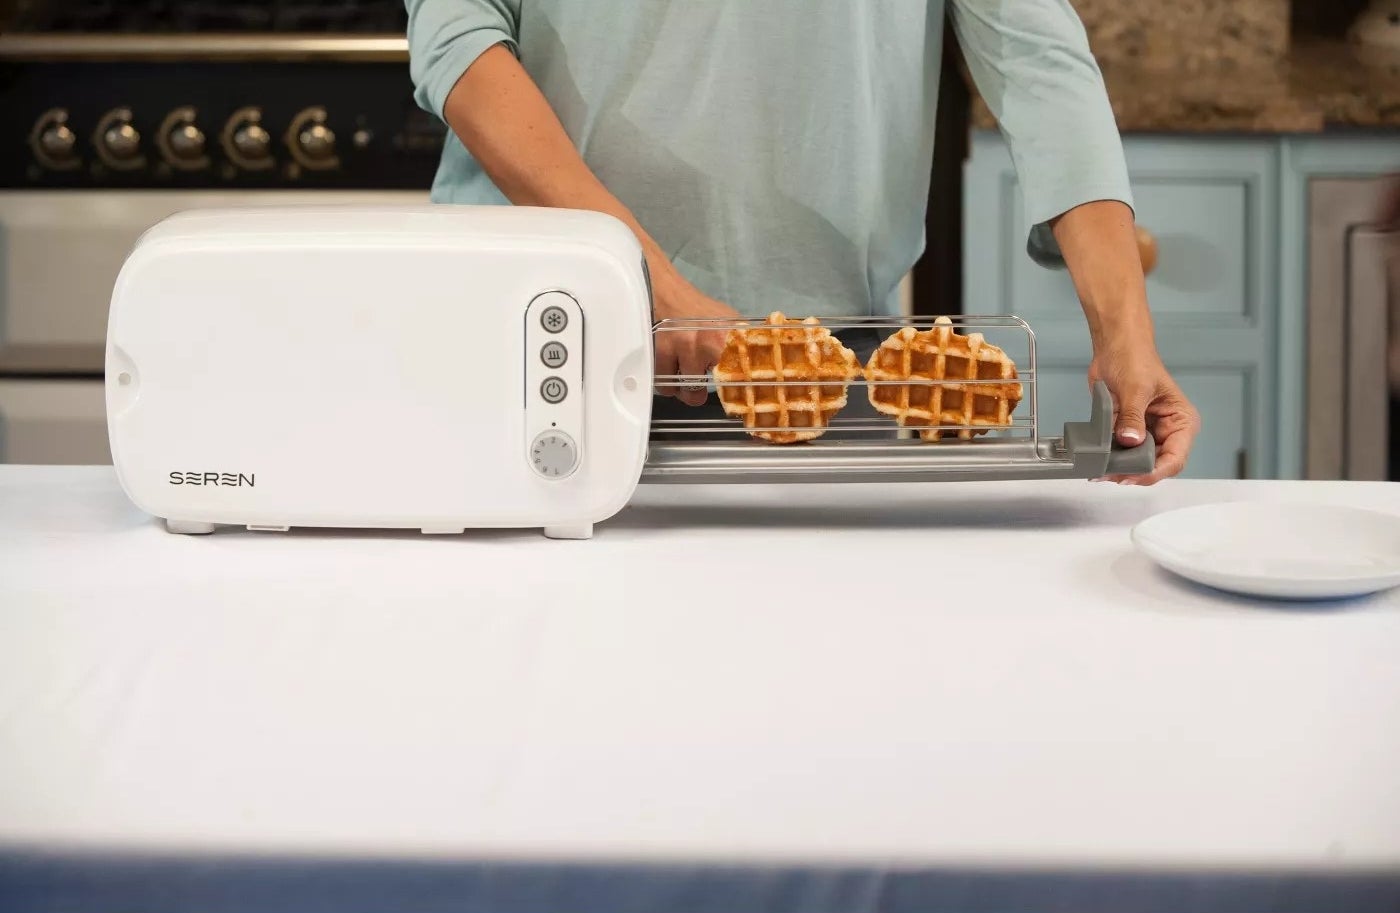 The wide white toaster with a side-loading toaster rack